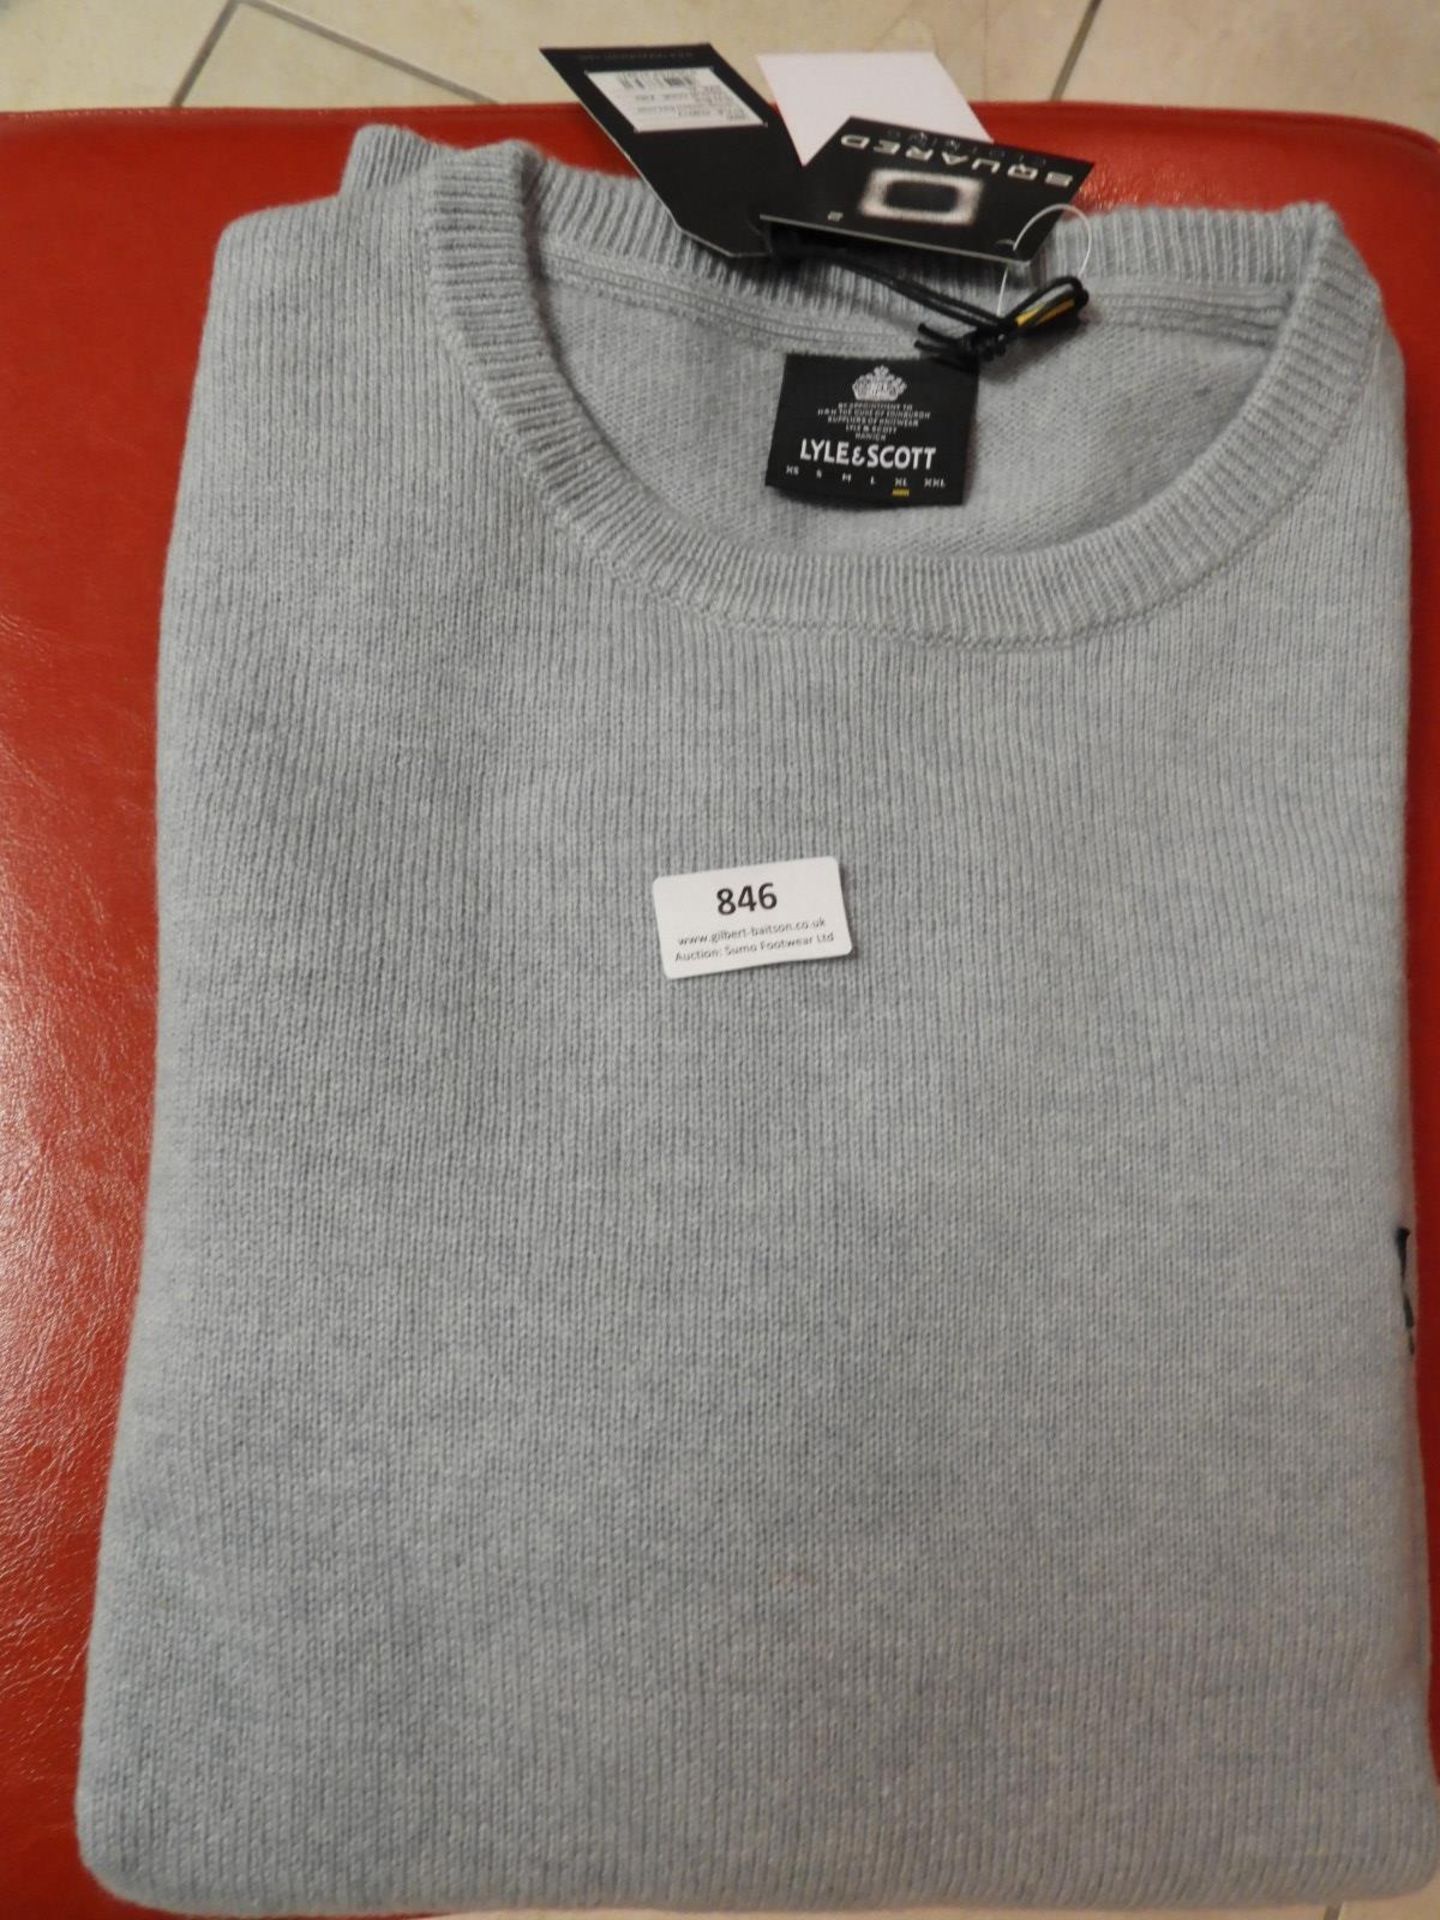 *Lyle & Scott Knitted Top Size: XL